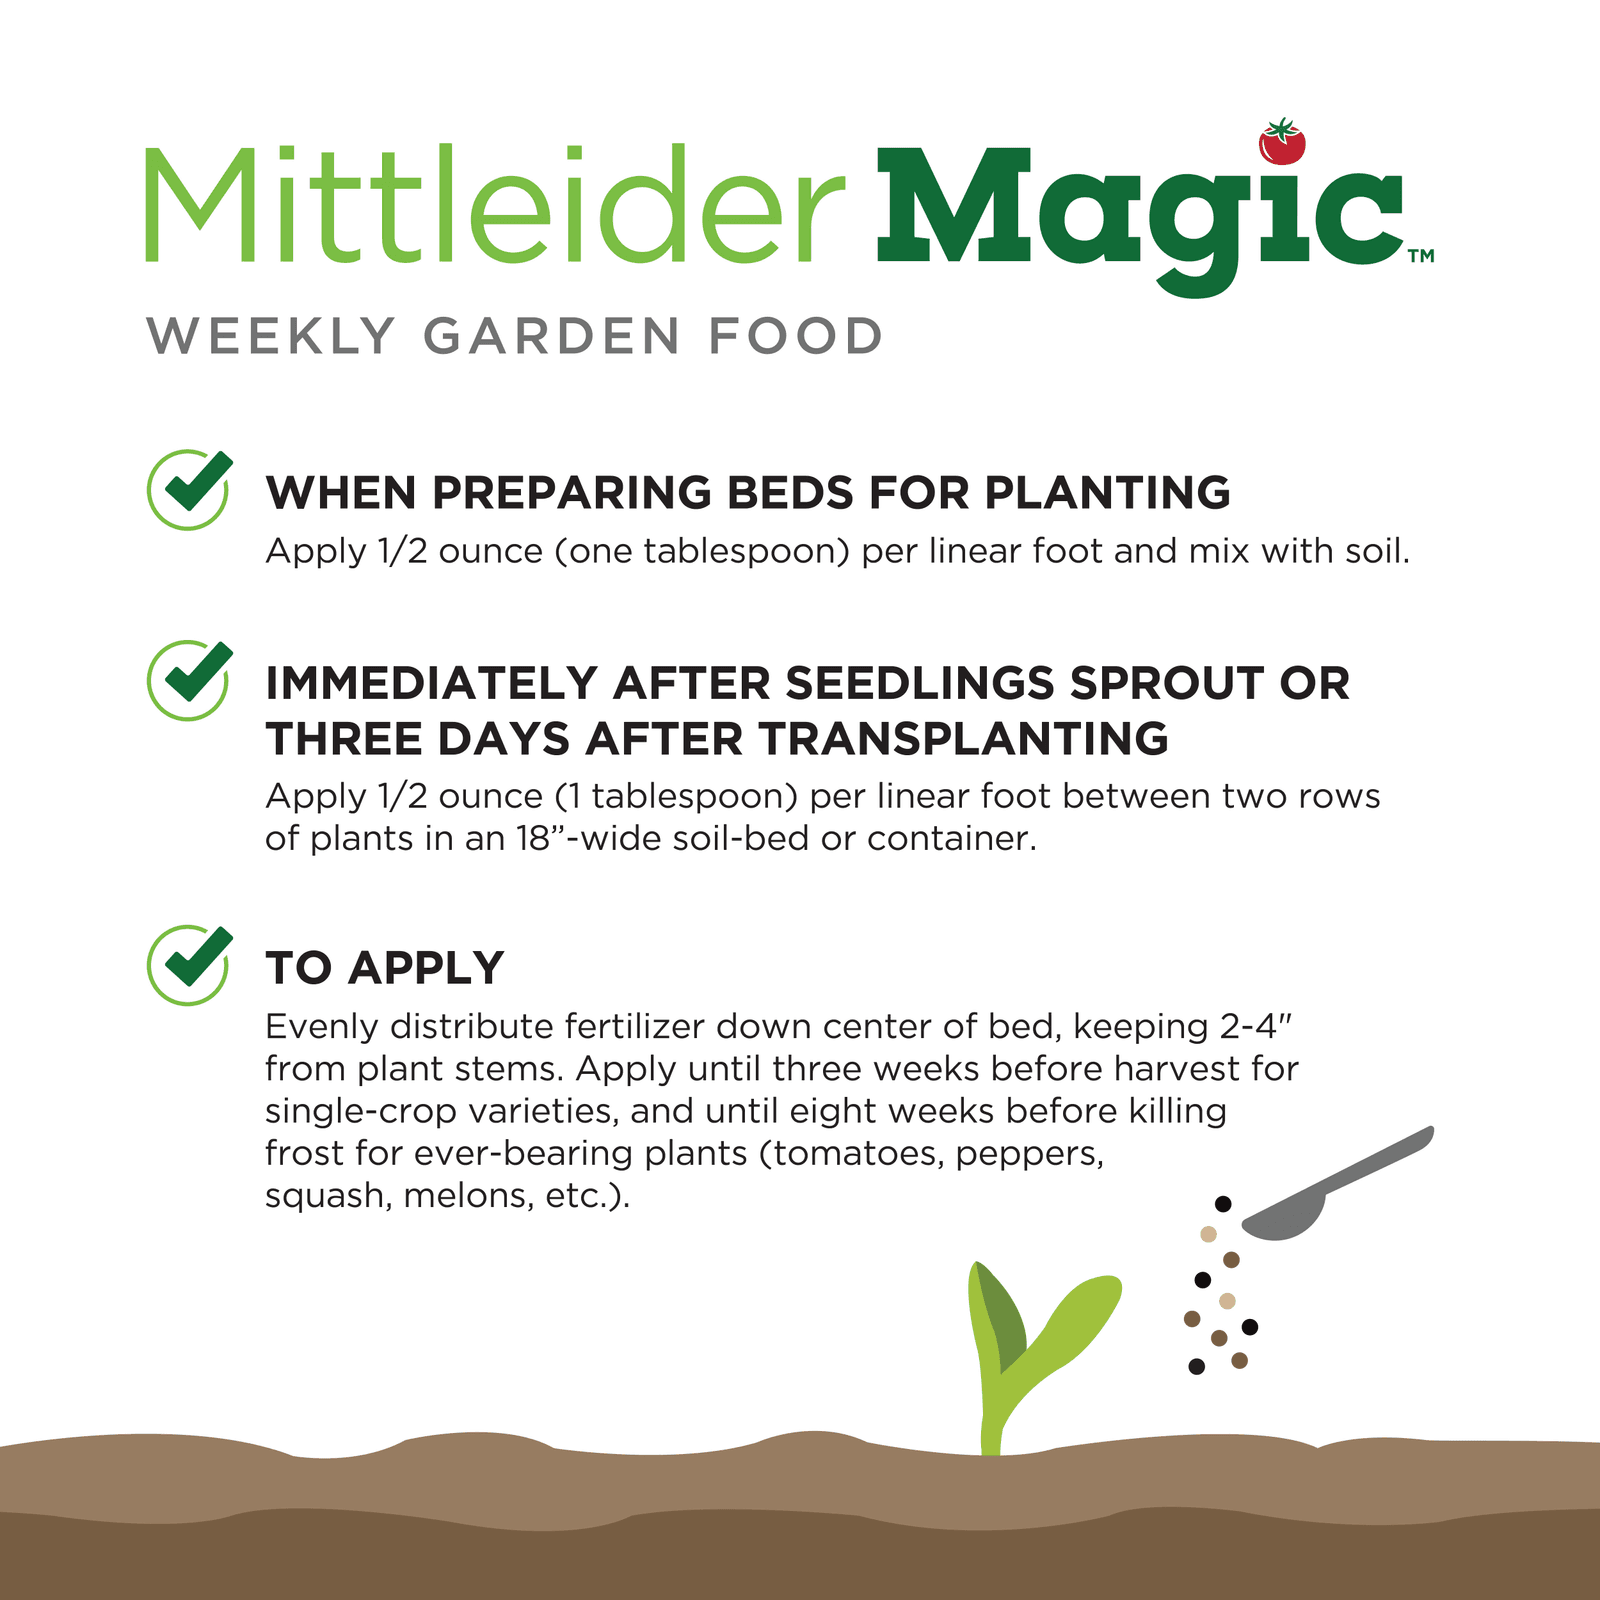 Mittleider Magic Weekly Application Tips